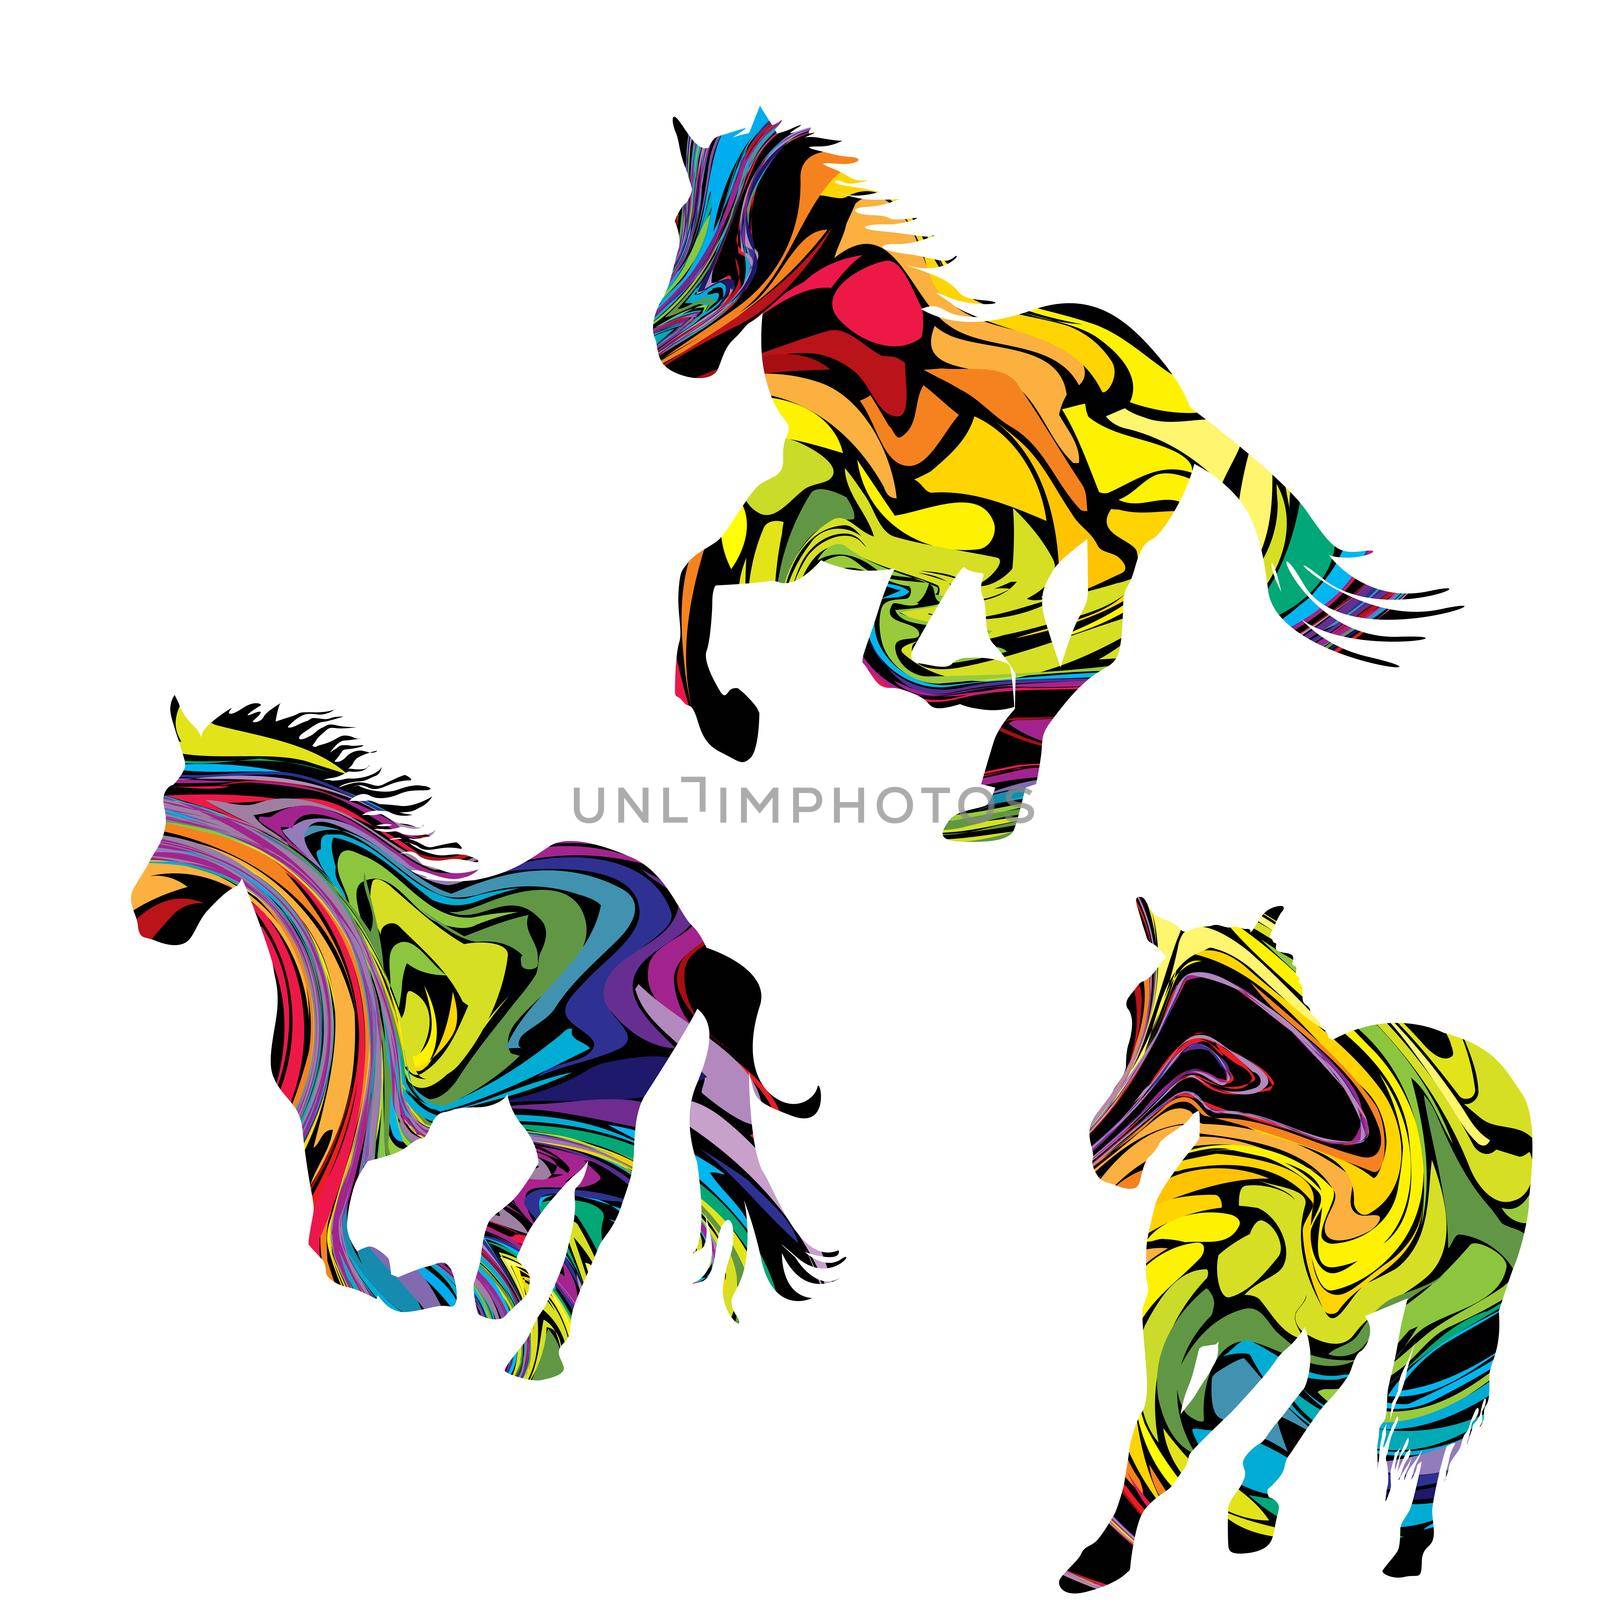 Colorful abstract silhouettes of three galloping horses